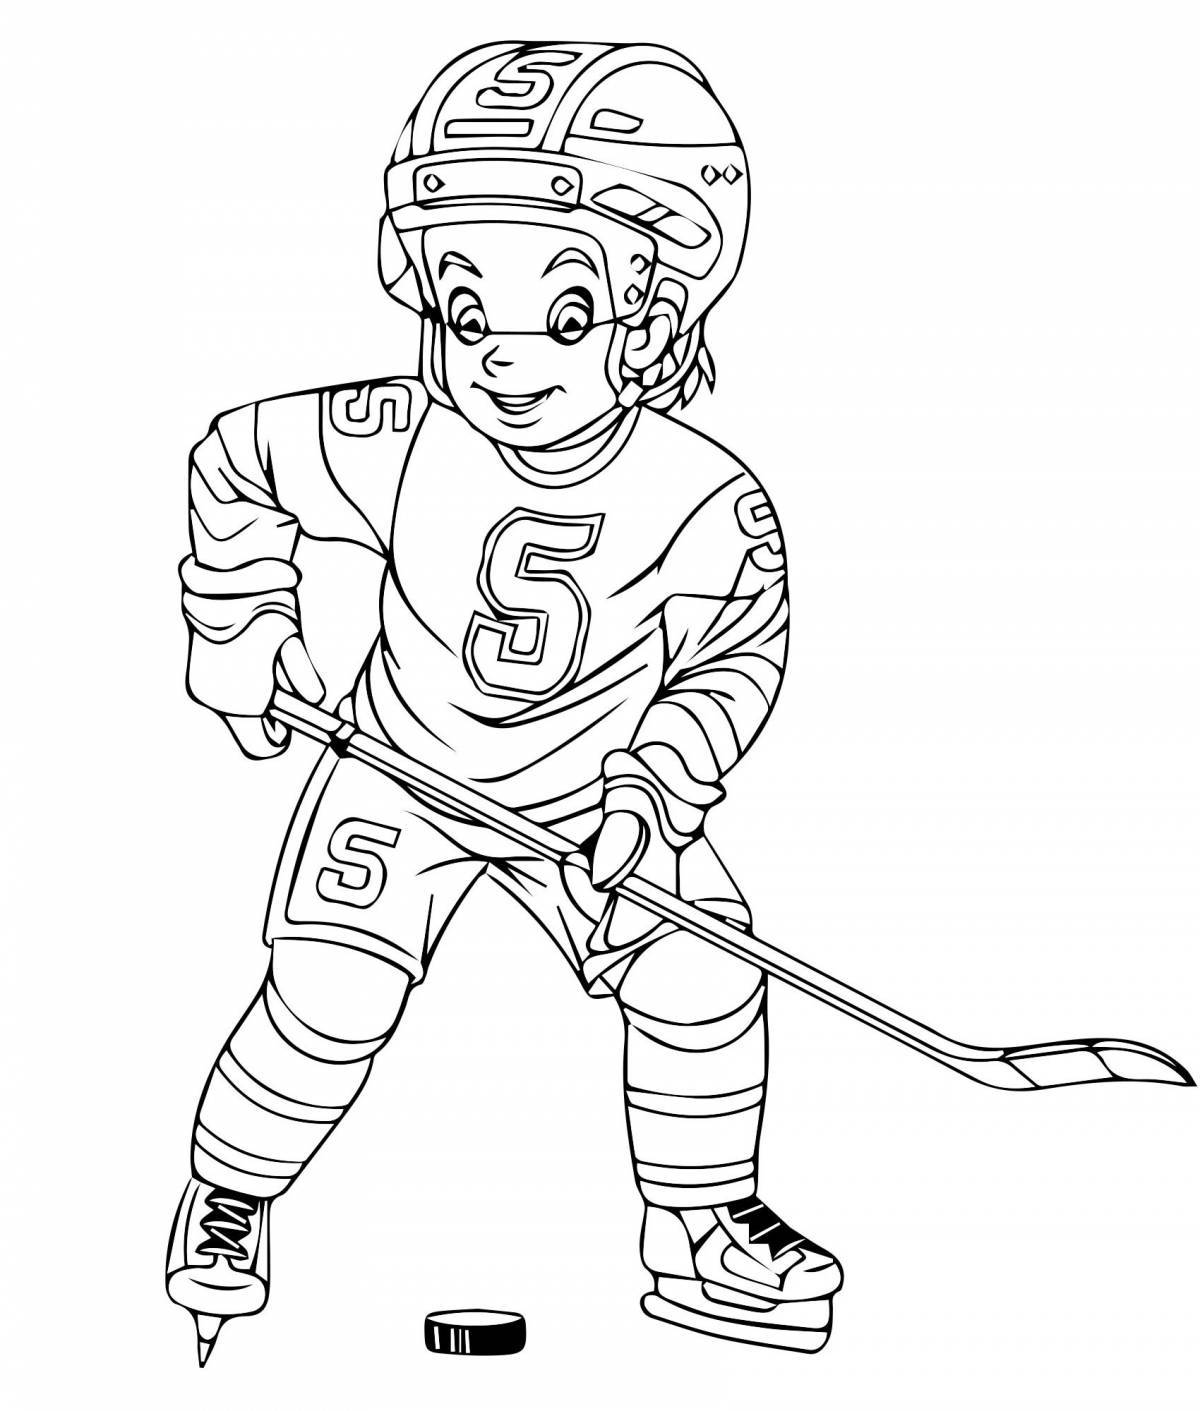 Live hockey player coloring pages for kids